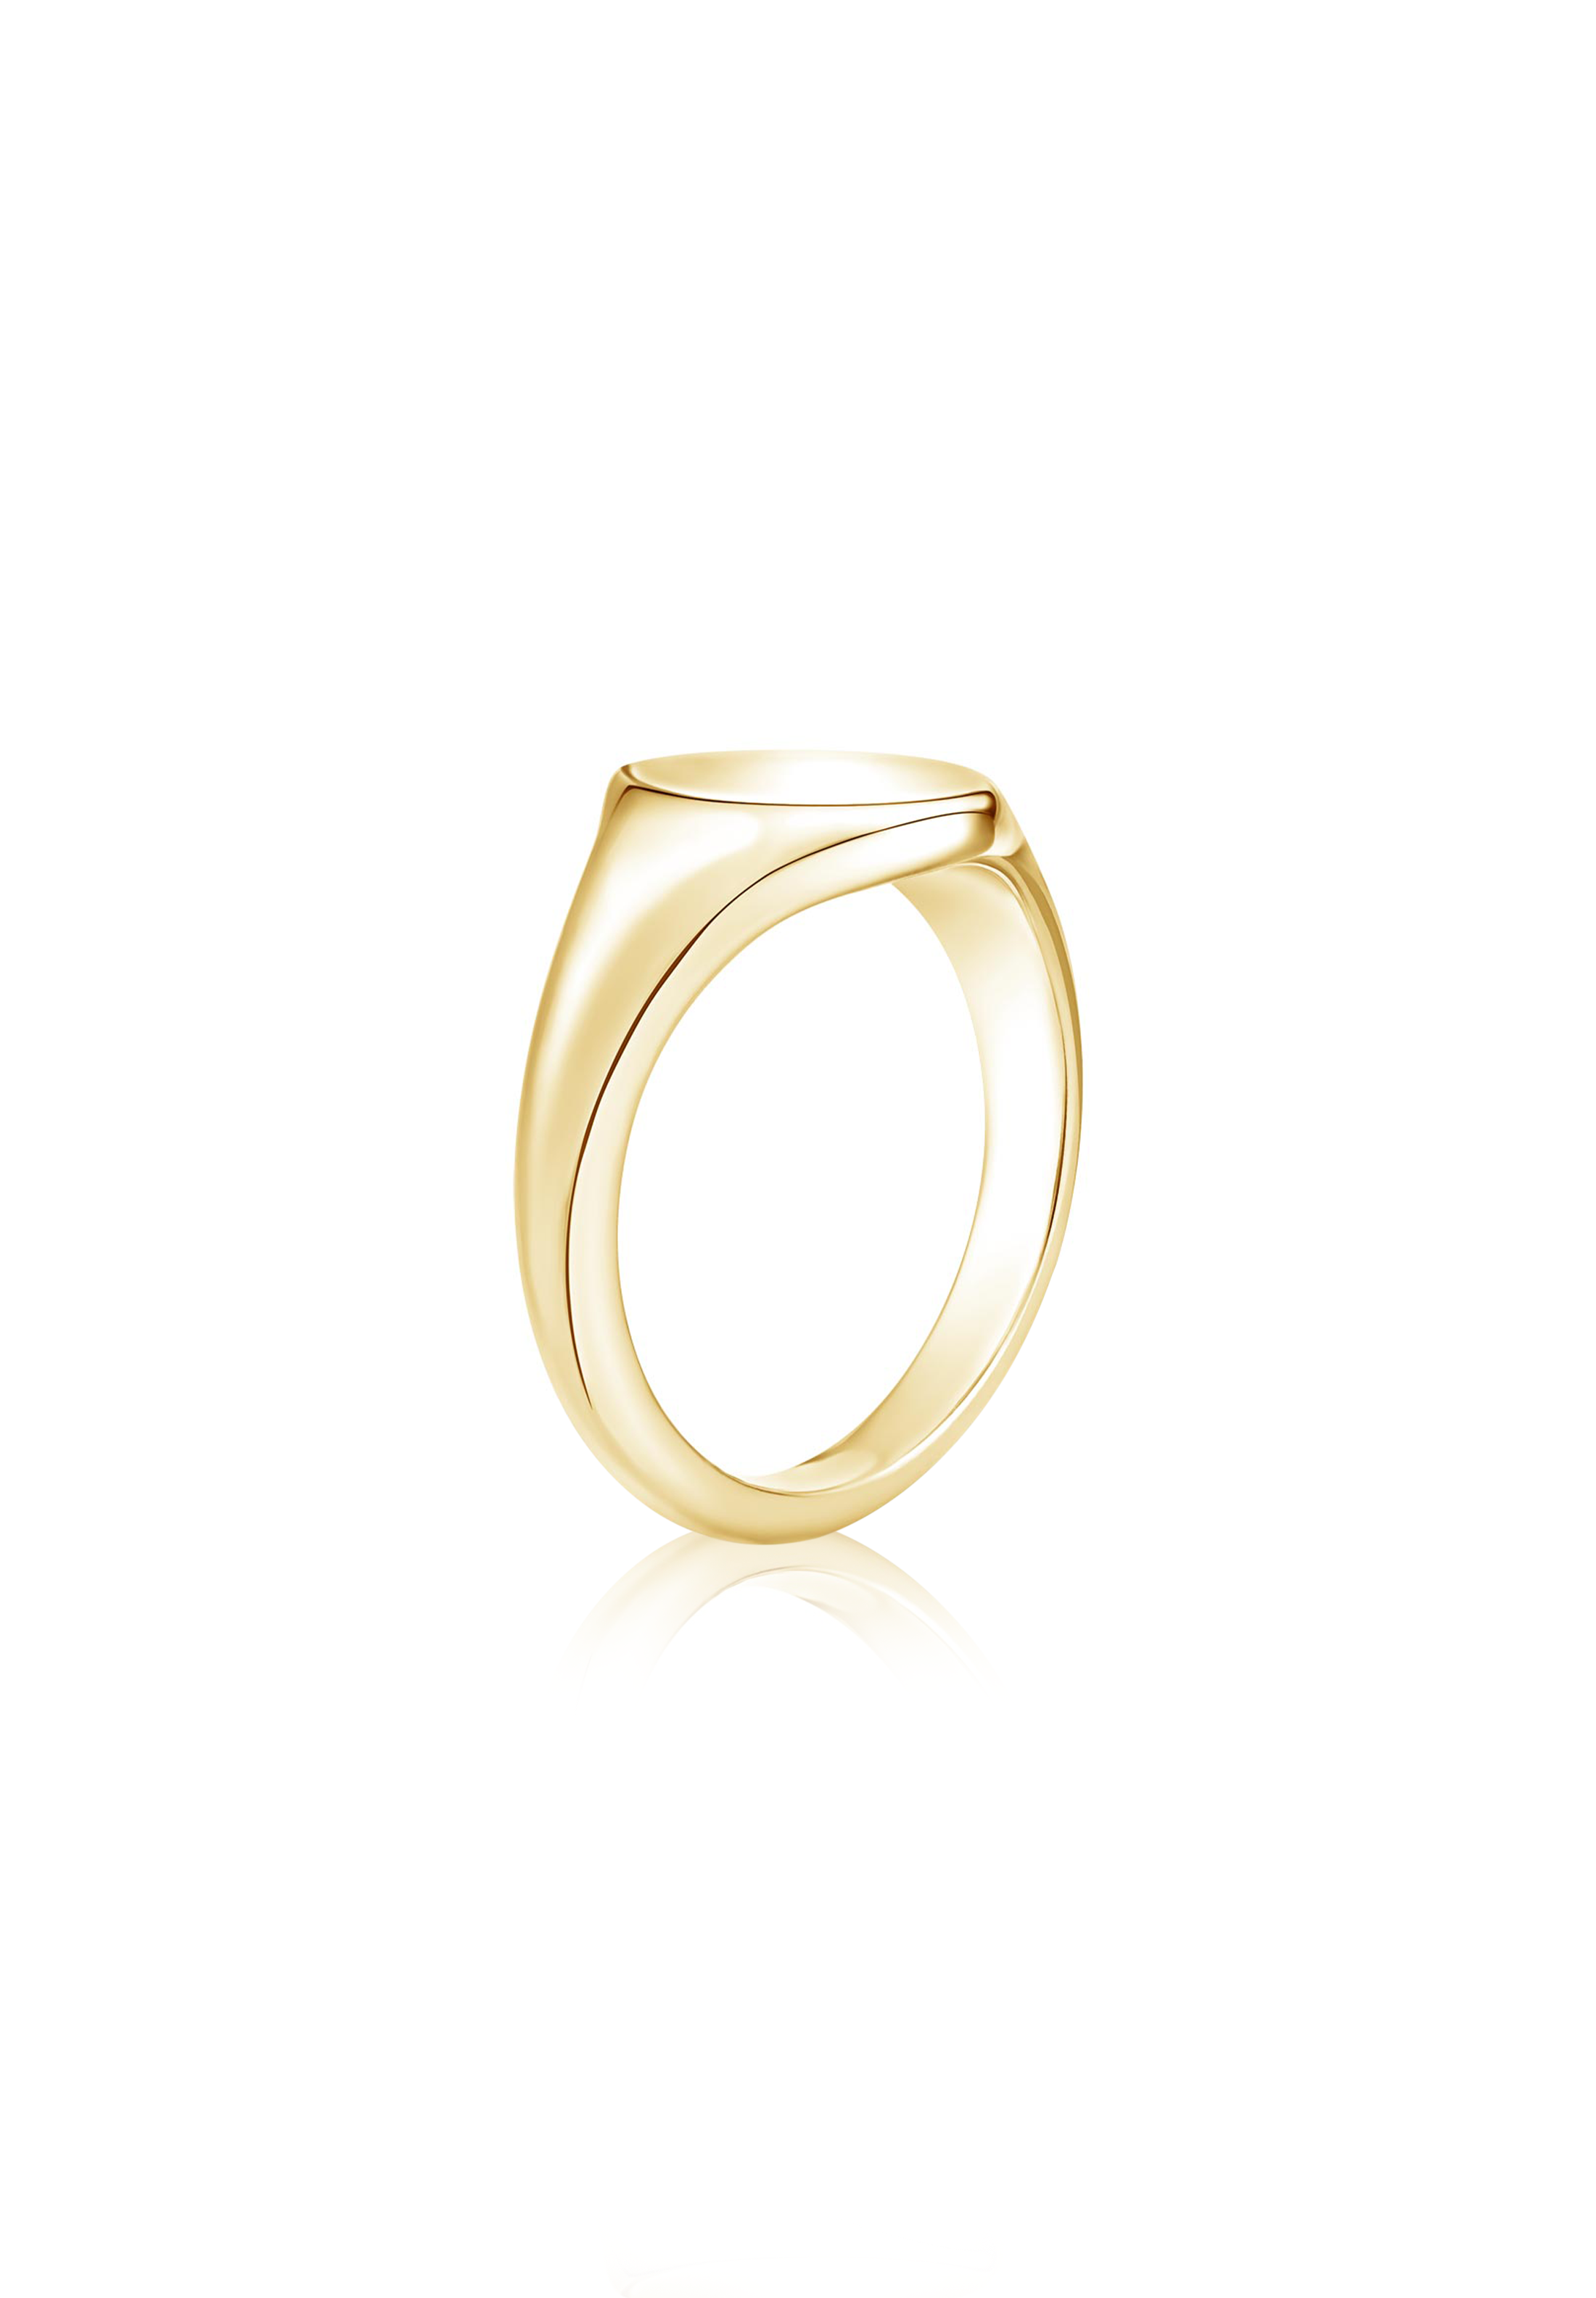 Solid Gold Signet Ring - Fenom & Co.